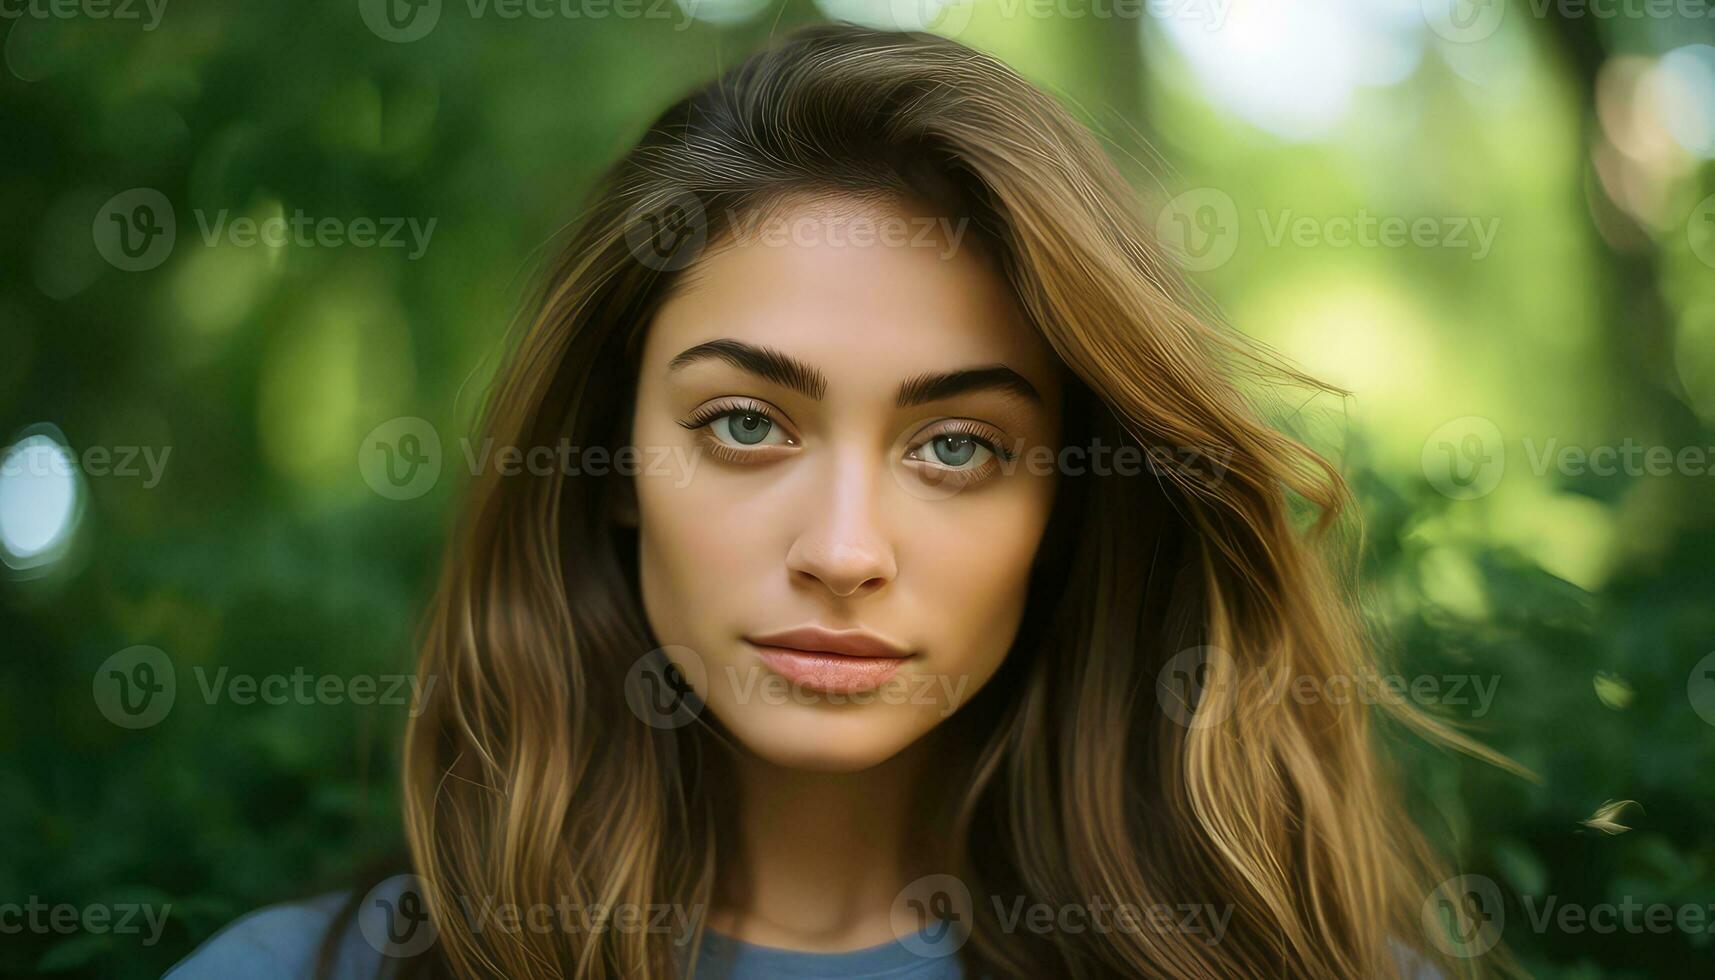 Youthful Intensity Close-Up Staring of a Girl AI generated photo